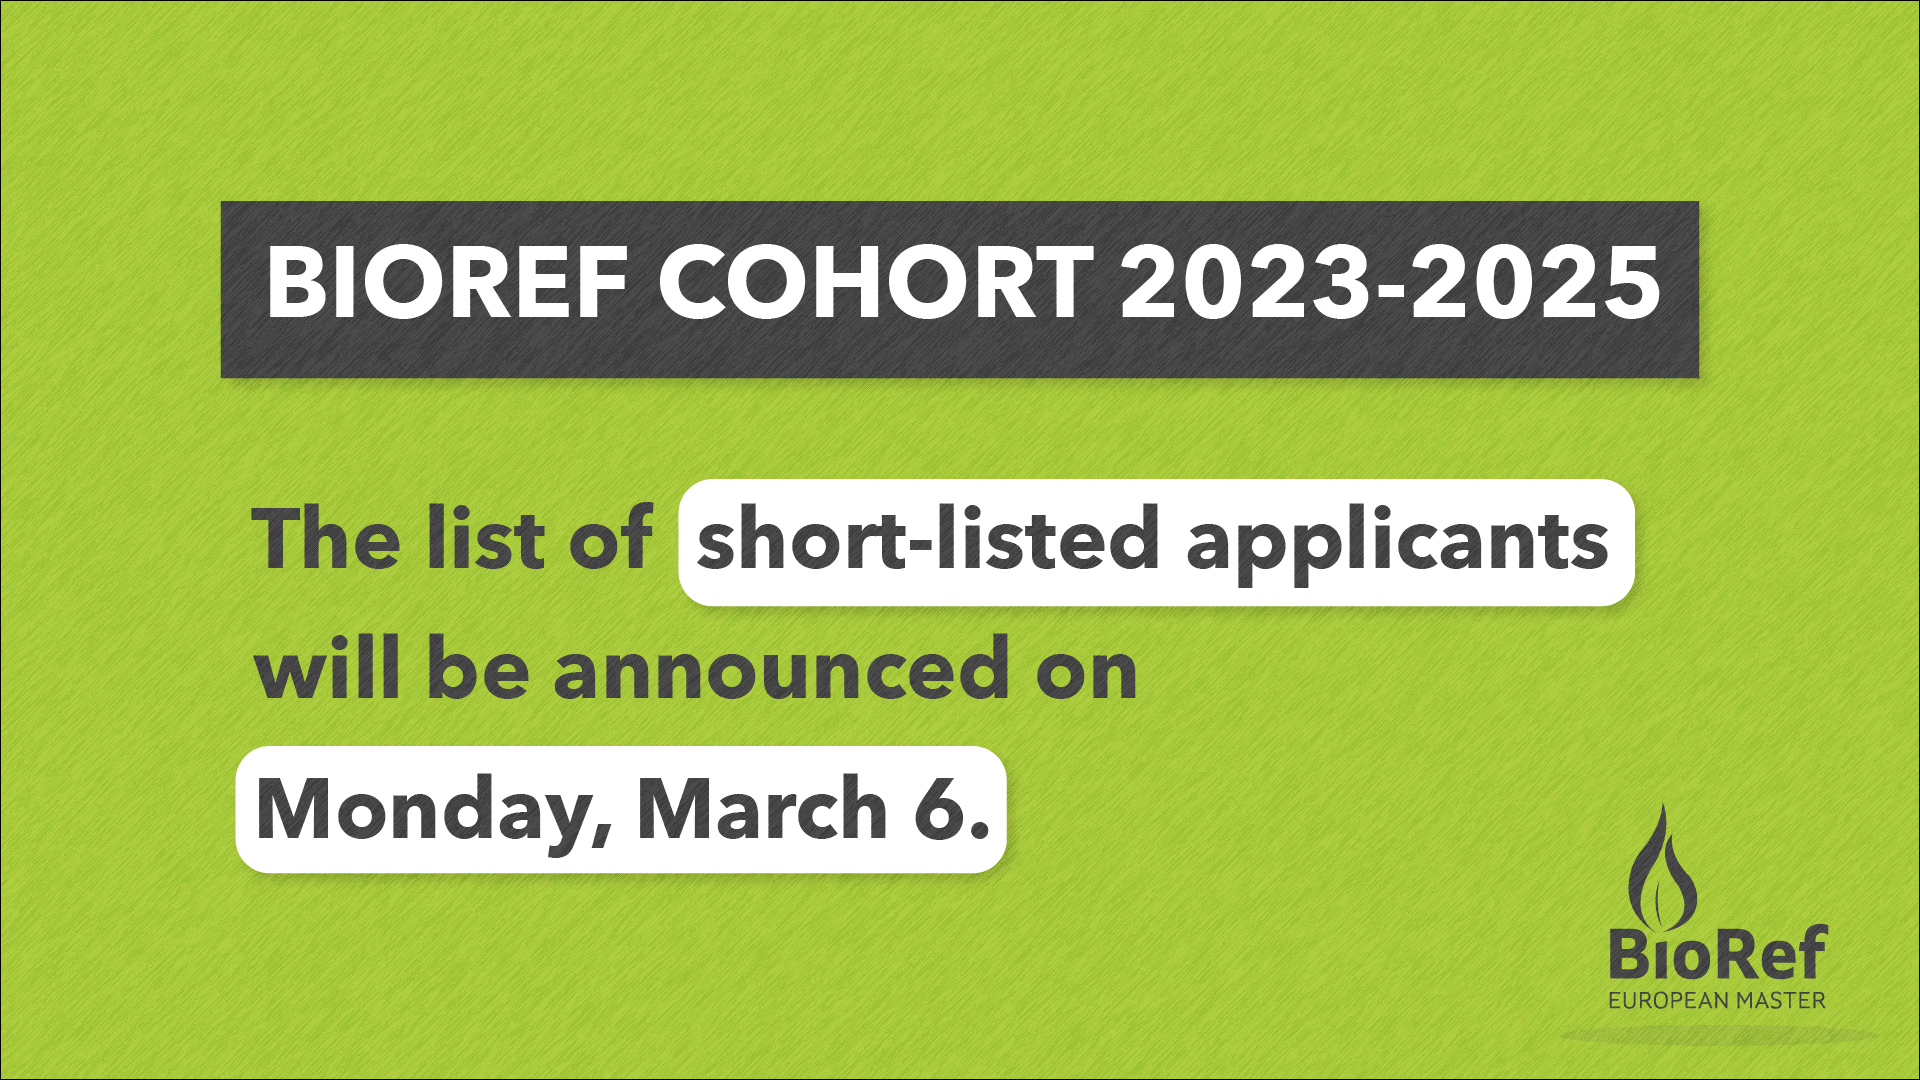 BIOREF COHORT 2023-2025: SHORT-LISTED APPLICANTS WILL BE ANNOUNCED ON MONDAY